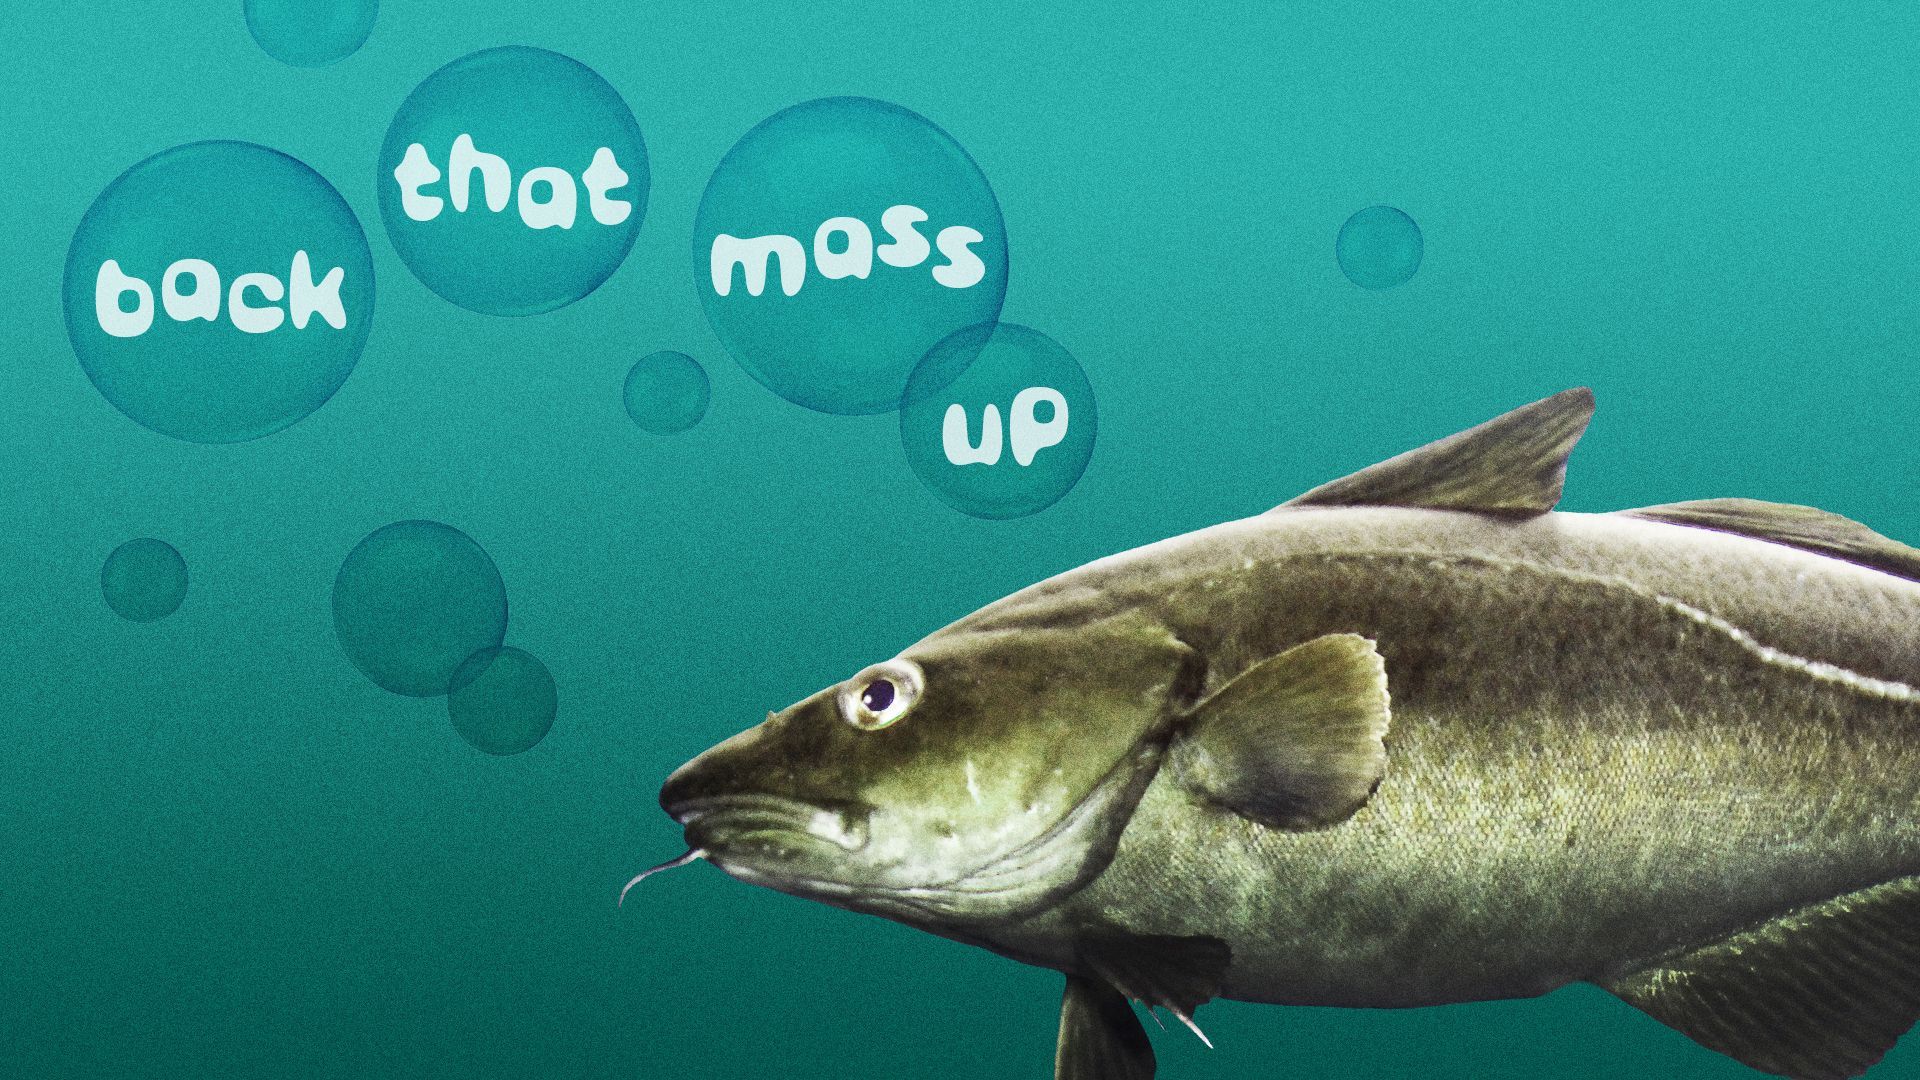 Illustration of a cod blowing bubbles that say "Back That Mass Up."